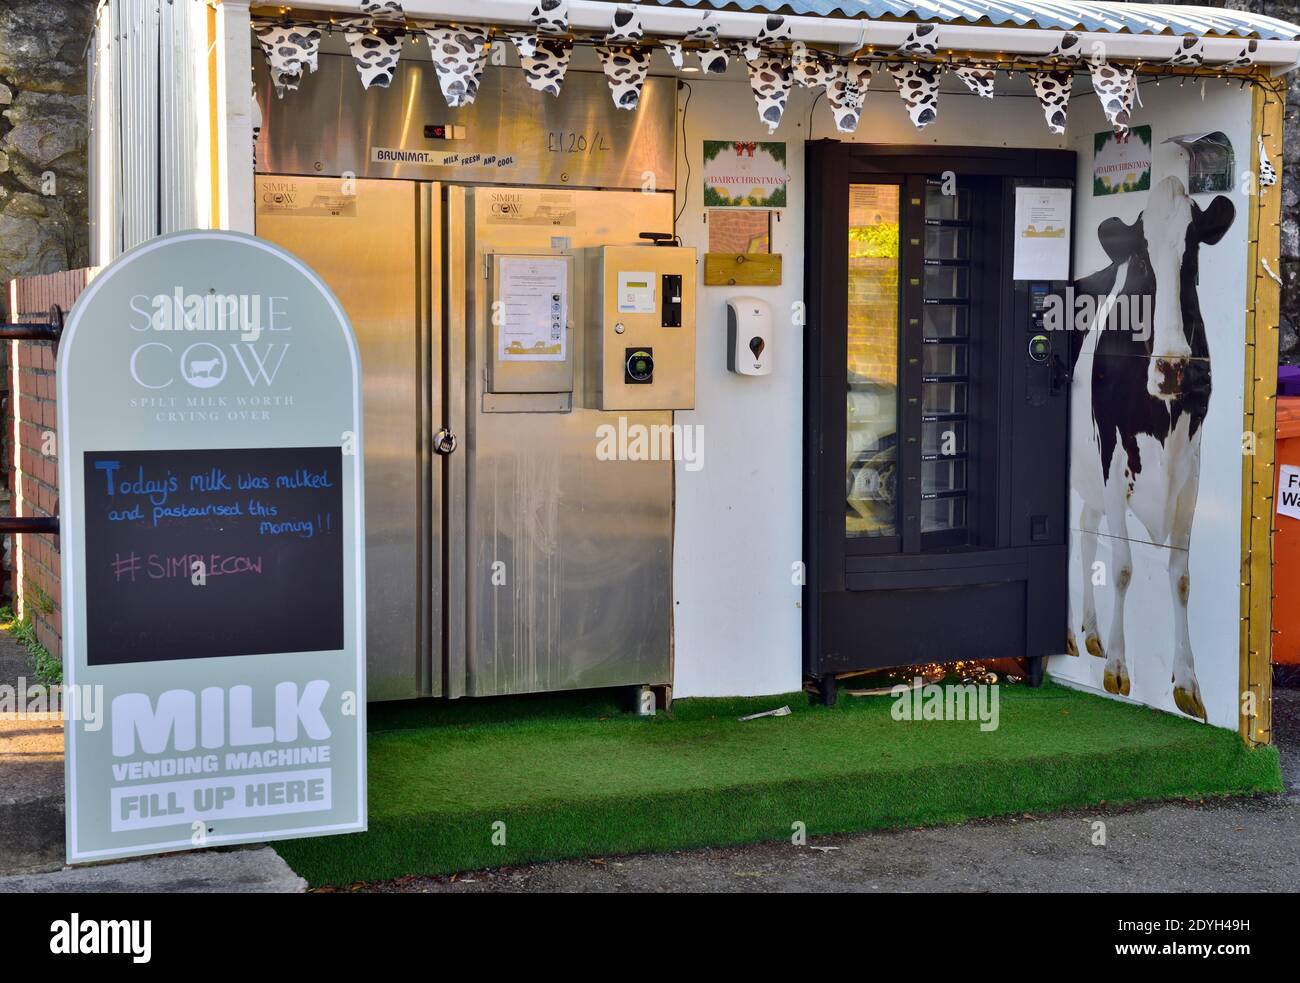 Milk vending machine, fresh milk from local farms with automated dispensing facility, Bristol, England Stock Photo